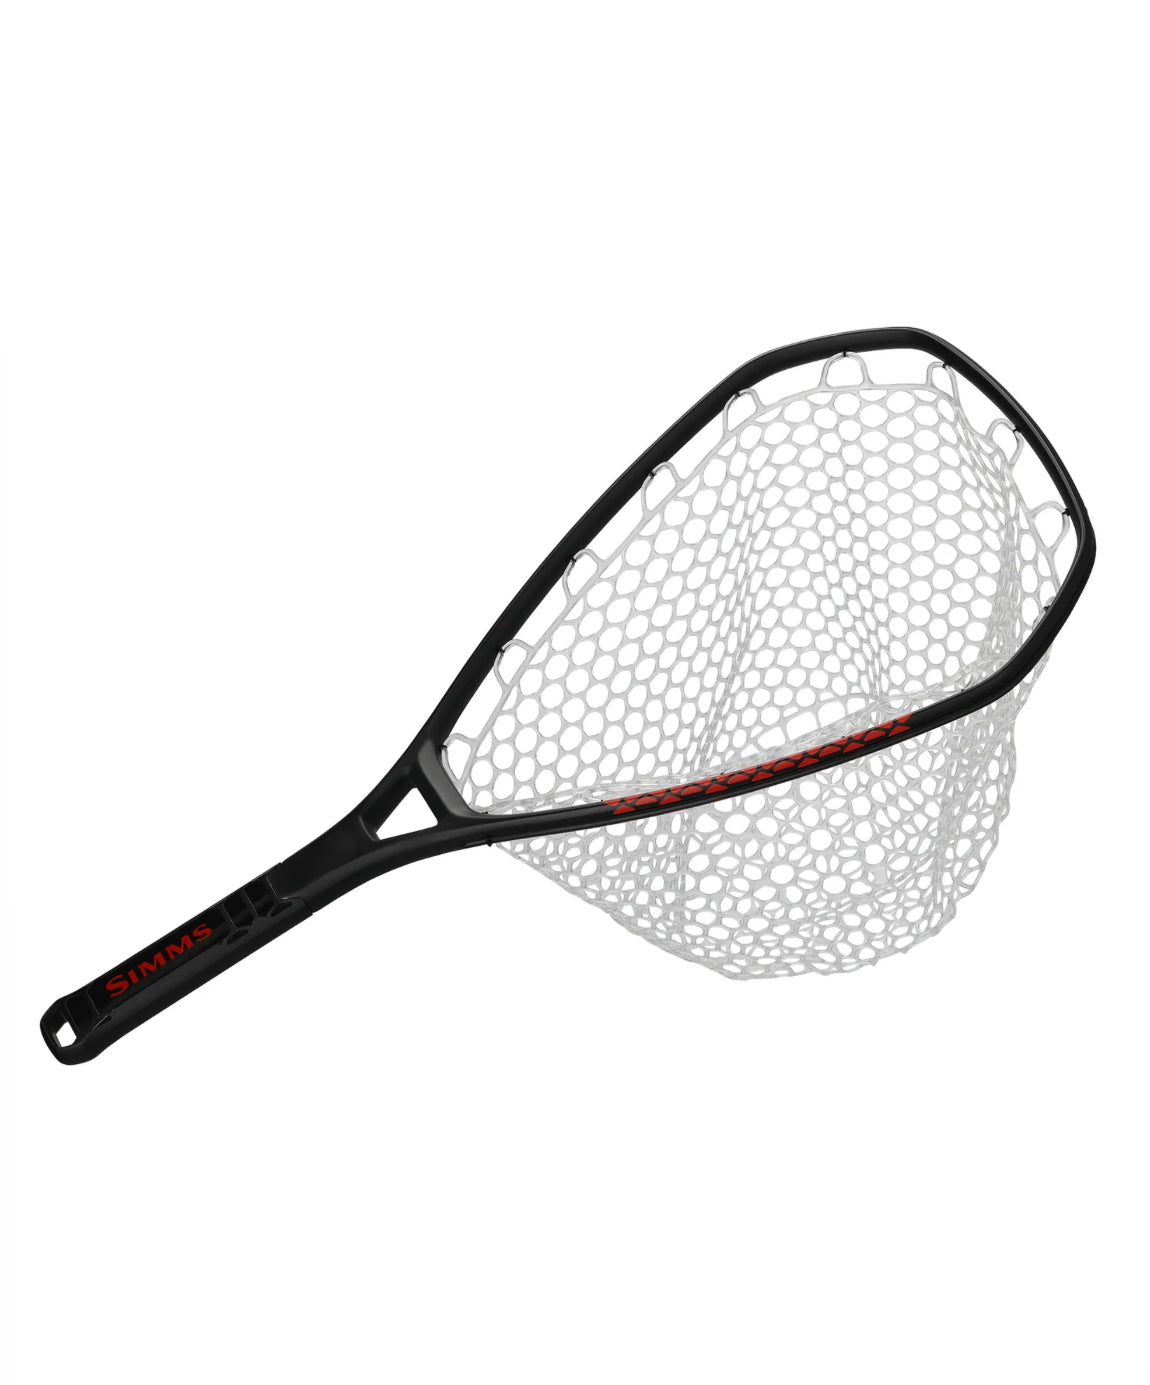 Fire Carbon Landing Net - Ames Fly Fishing